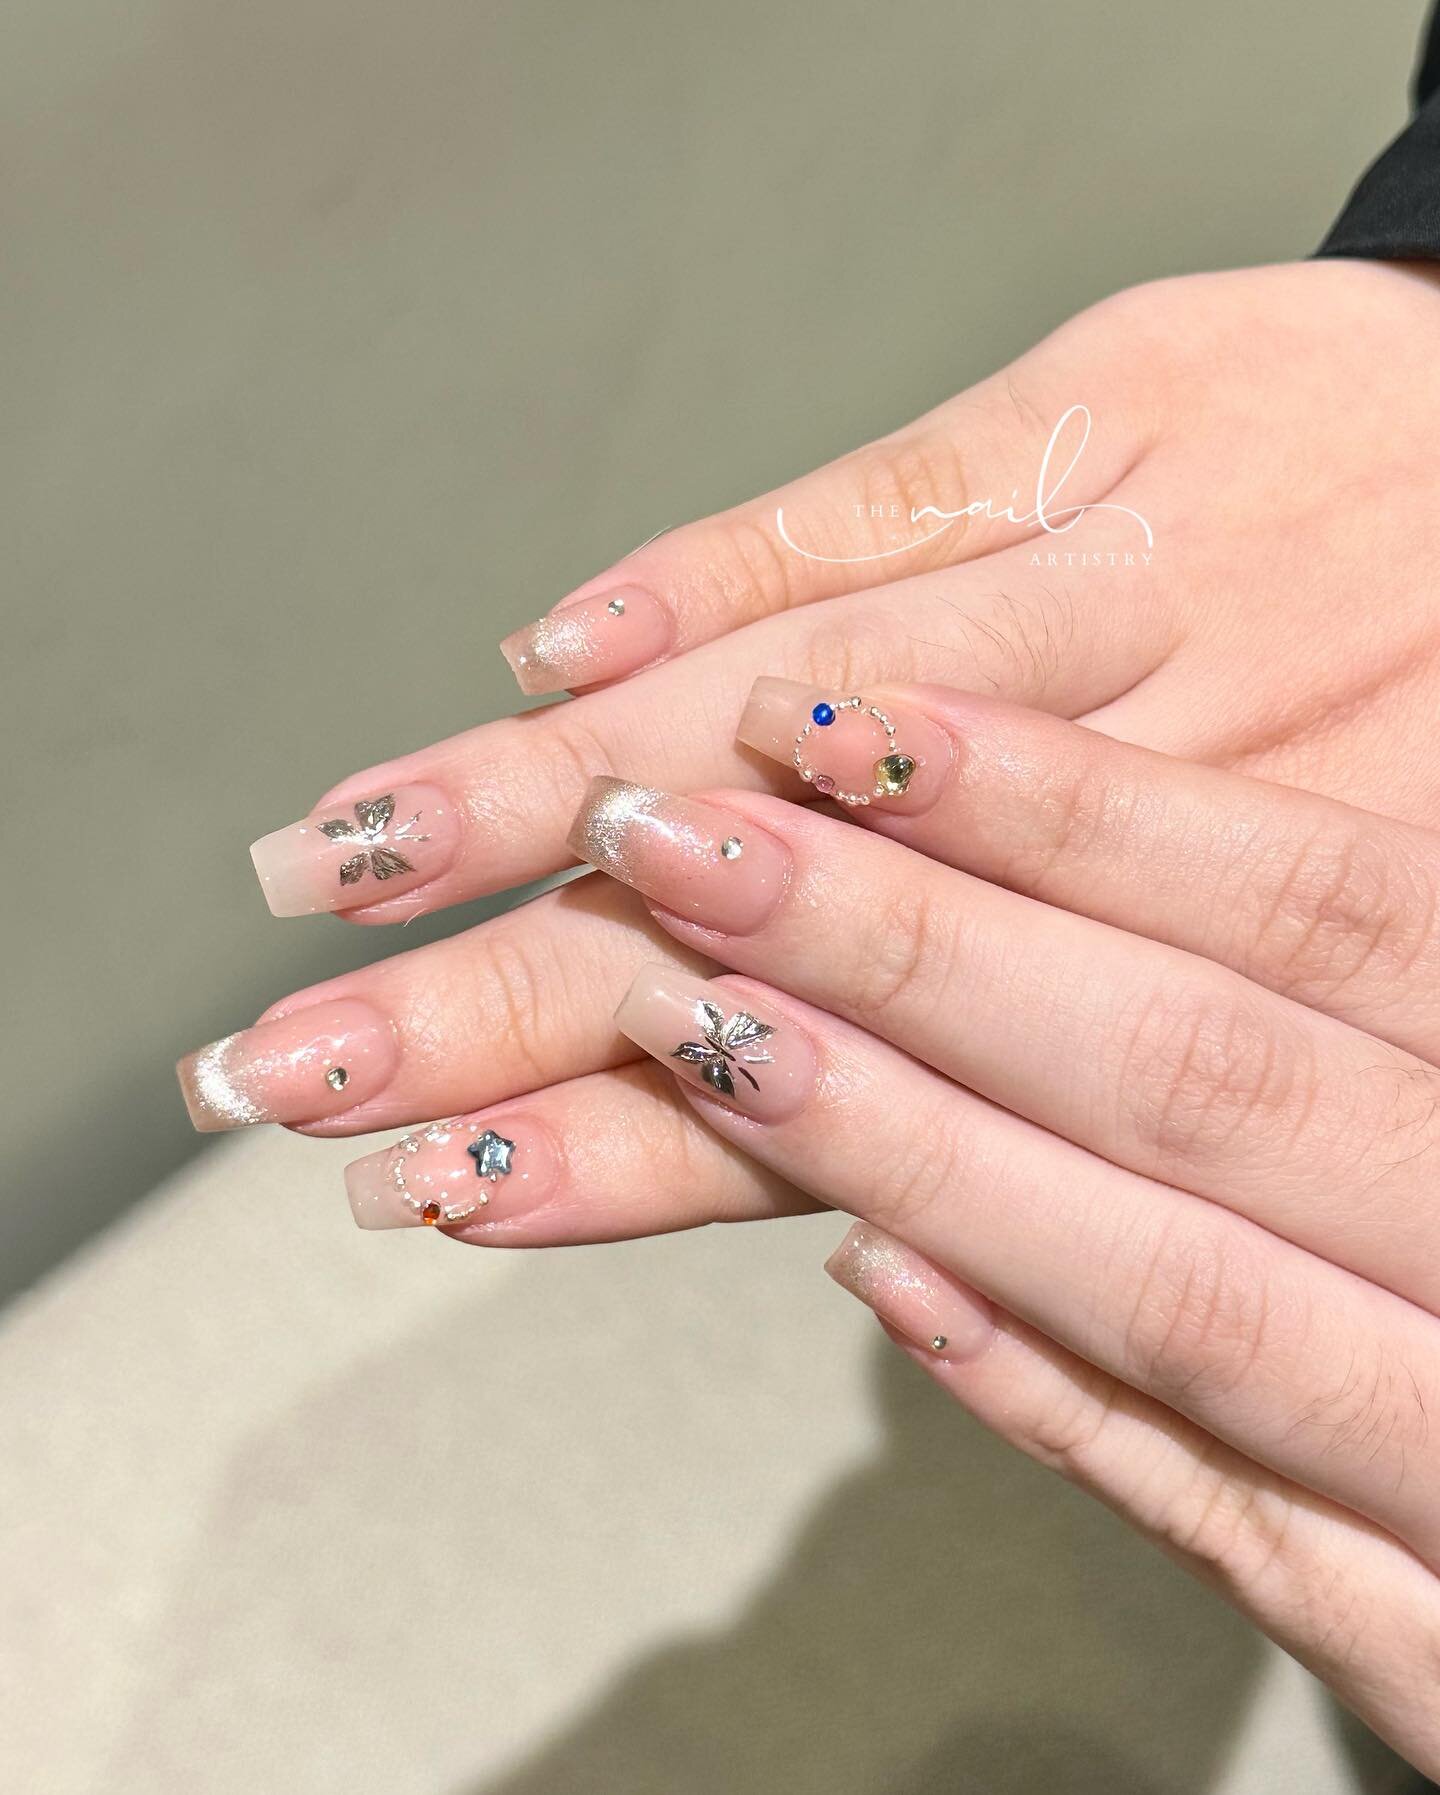 Every girl needs to do ombre velvet cat eye nails once ✨🦋

💅🏻 Nails extension set with acrylic powder + ombre super shinny/reflective velvet colour + hand-painted 3D butterflies + custom gemstones ~ by Jay 
✨ We can create this style on natural na